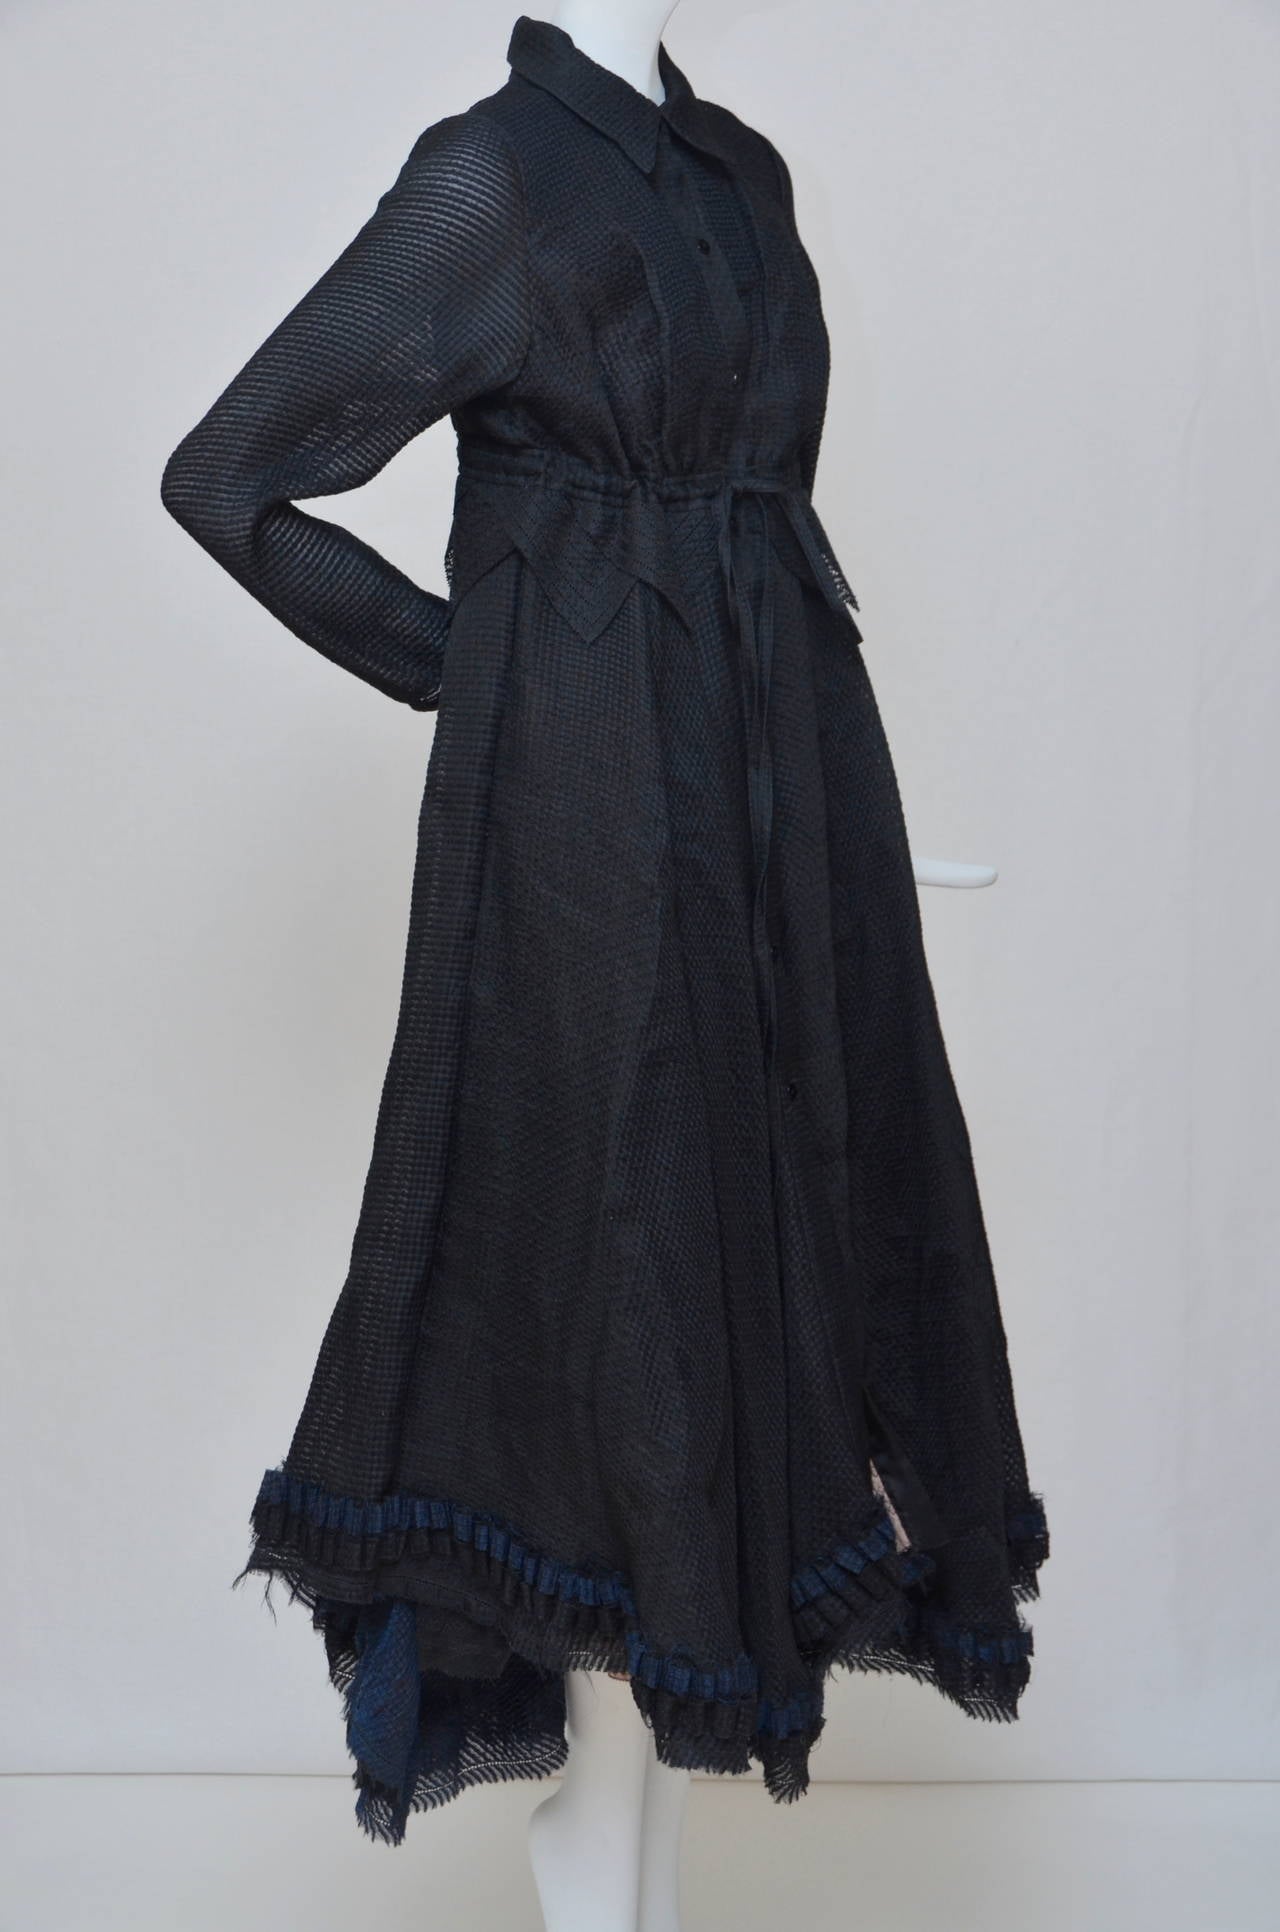 Isabel Toledo black dress.
Inside dress is all lined except sleeves.Bottom part of the dress have additional tulle mesh lining beside silk and it is adding a volume look to it..Button down closure in the front.
Size 8.Made in USA.
End of the